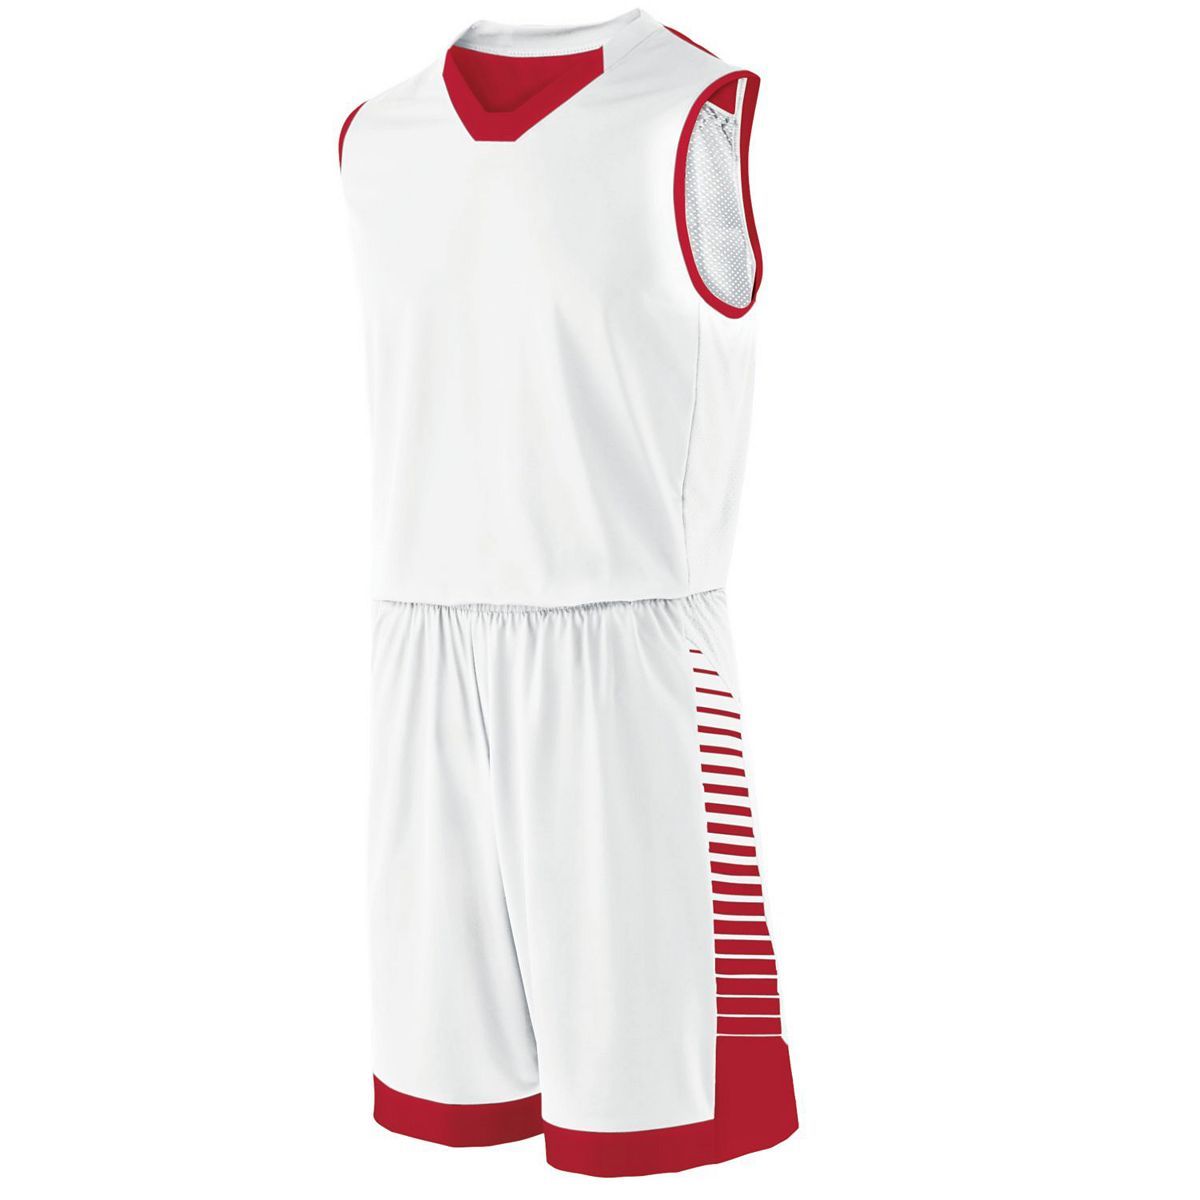 Holloway Youth Arc Shorts in White/Scarlet  -Part of the Youth, Youth-Shorts, Basketball, Holloway, All-Sports, All-Sports-1 product lines at KanaleyCreations.com